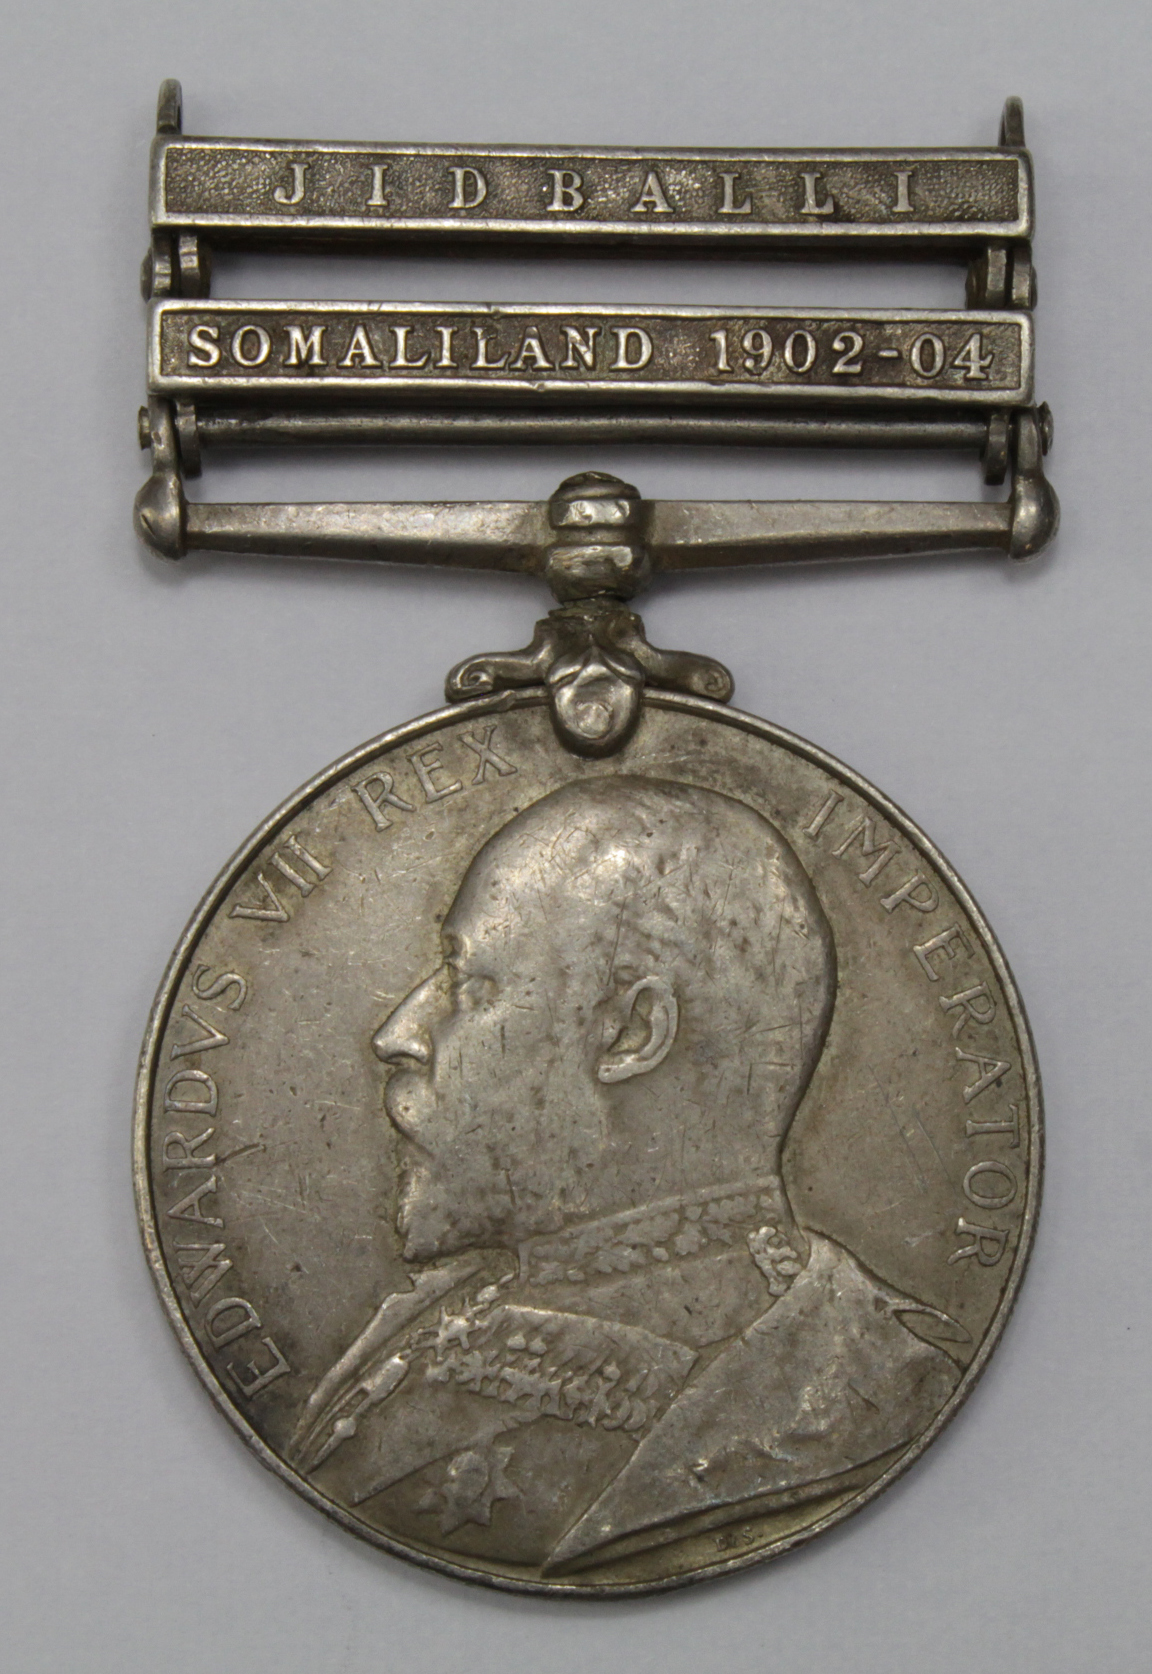 Africa General Service Medal EDVII with bars Somaliland 1902-04, and Jidballi, named 2050 Sepoy